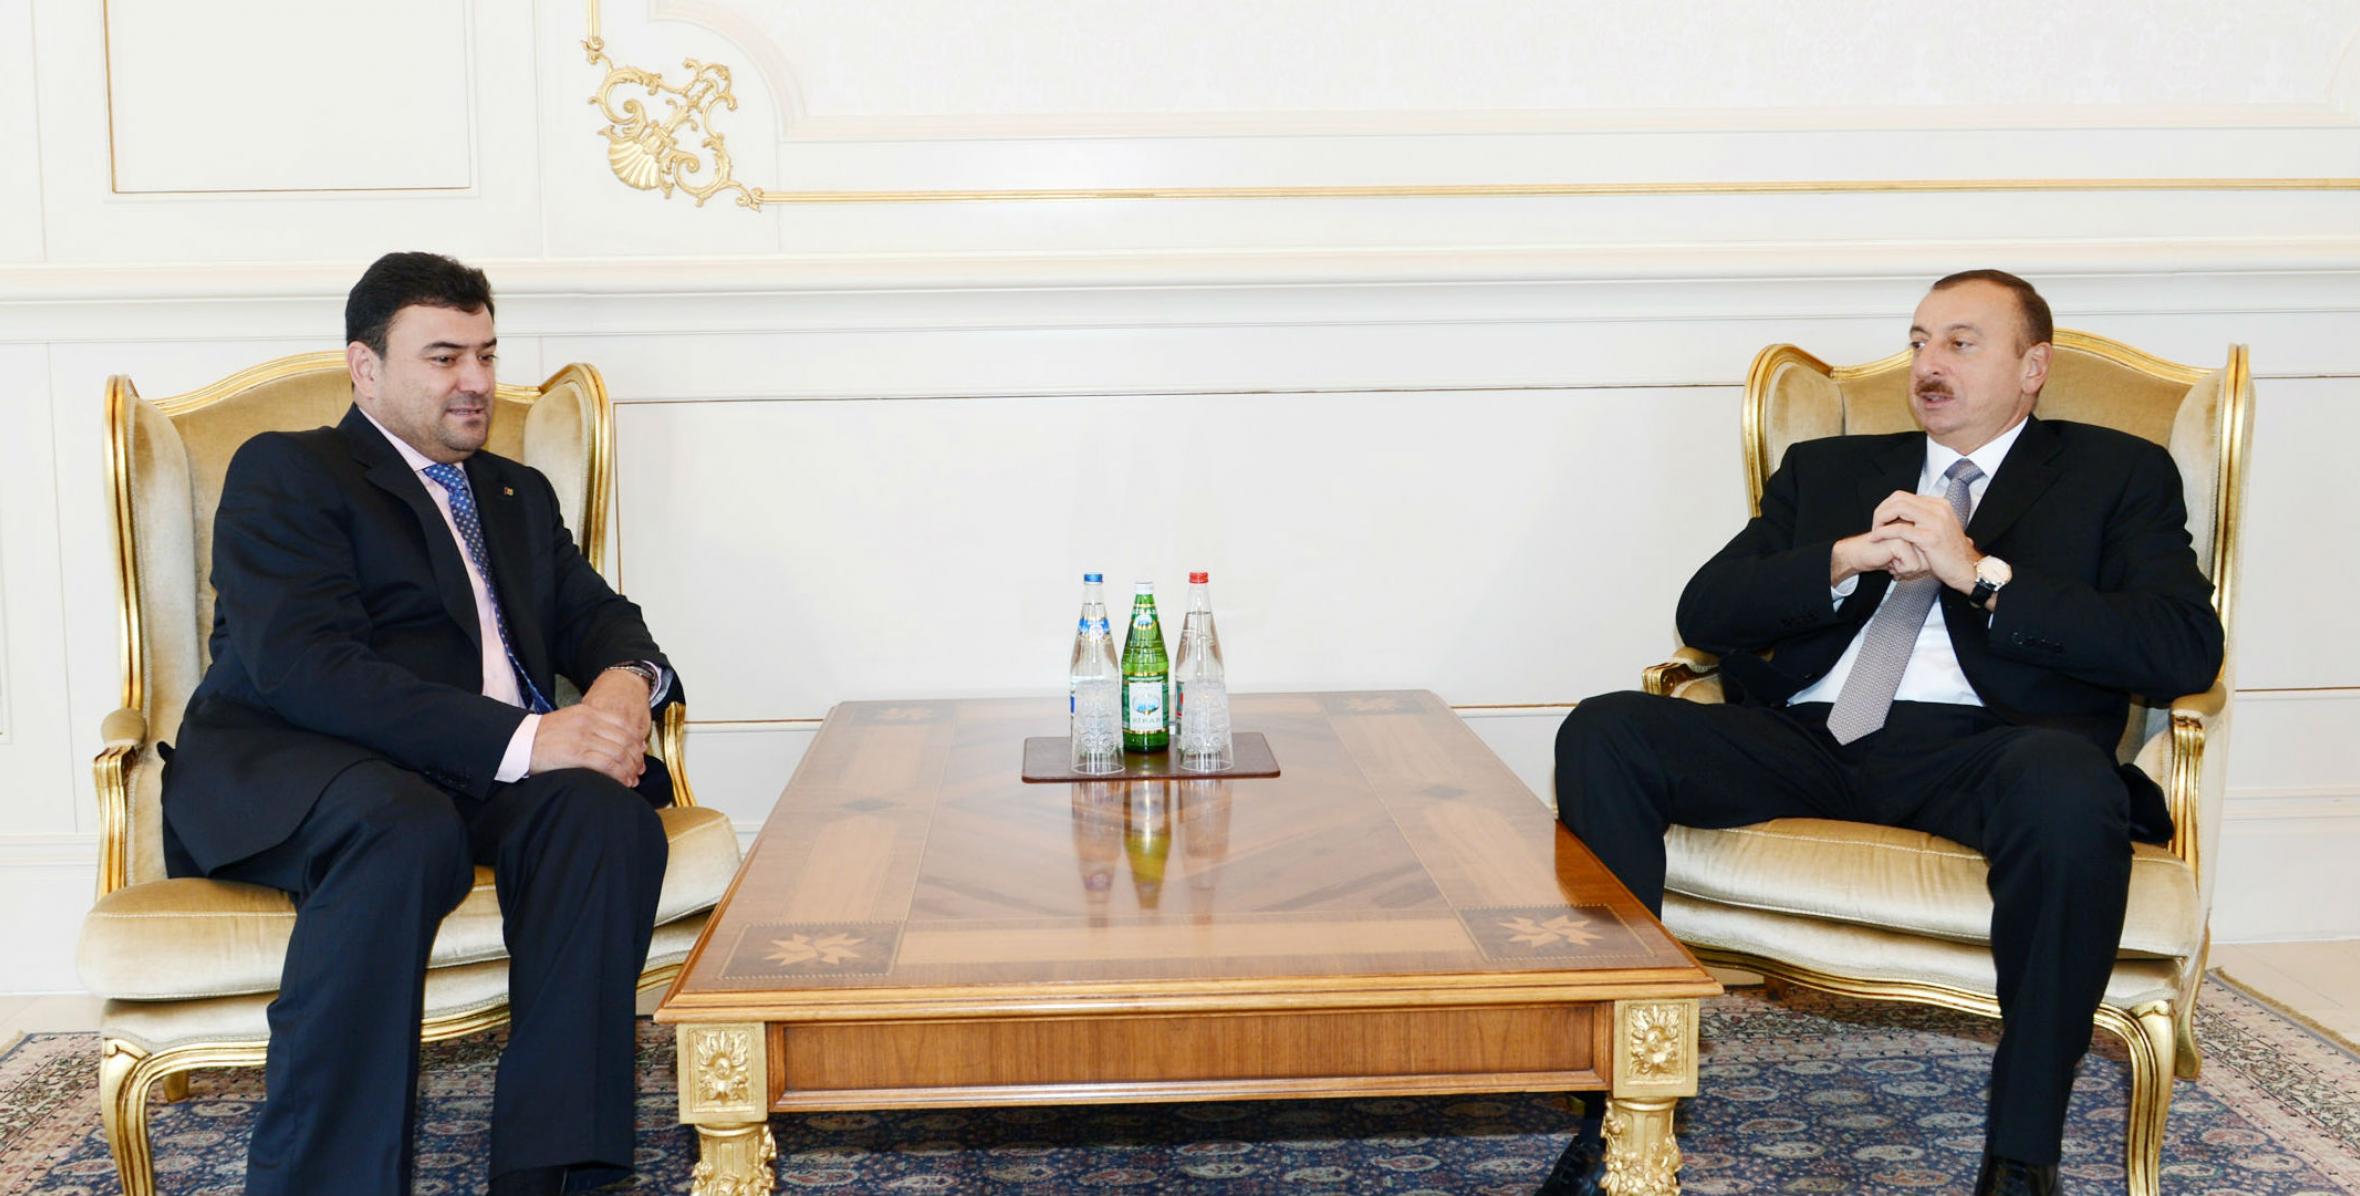 Ilham Aliyev accepted the credentials from the newly-appointed Ambassador of Afghanistan to Azerbaijan